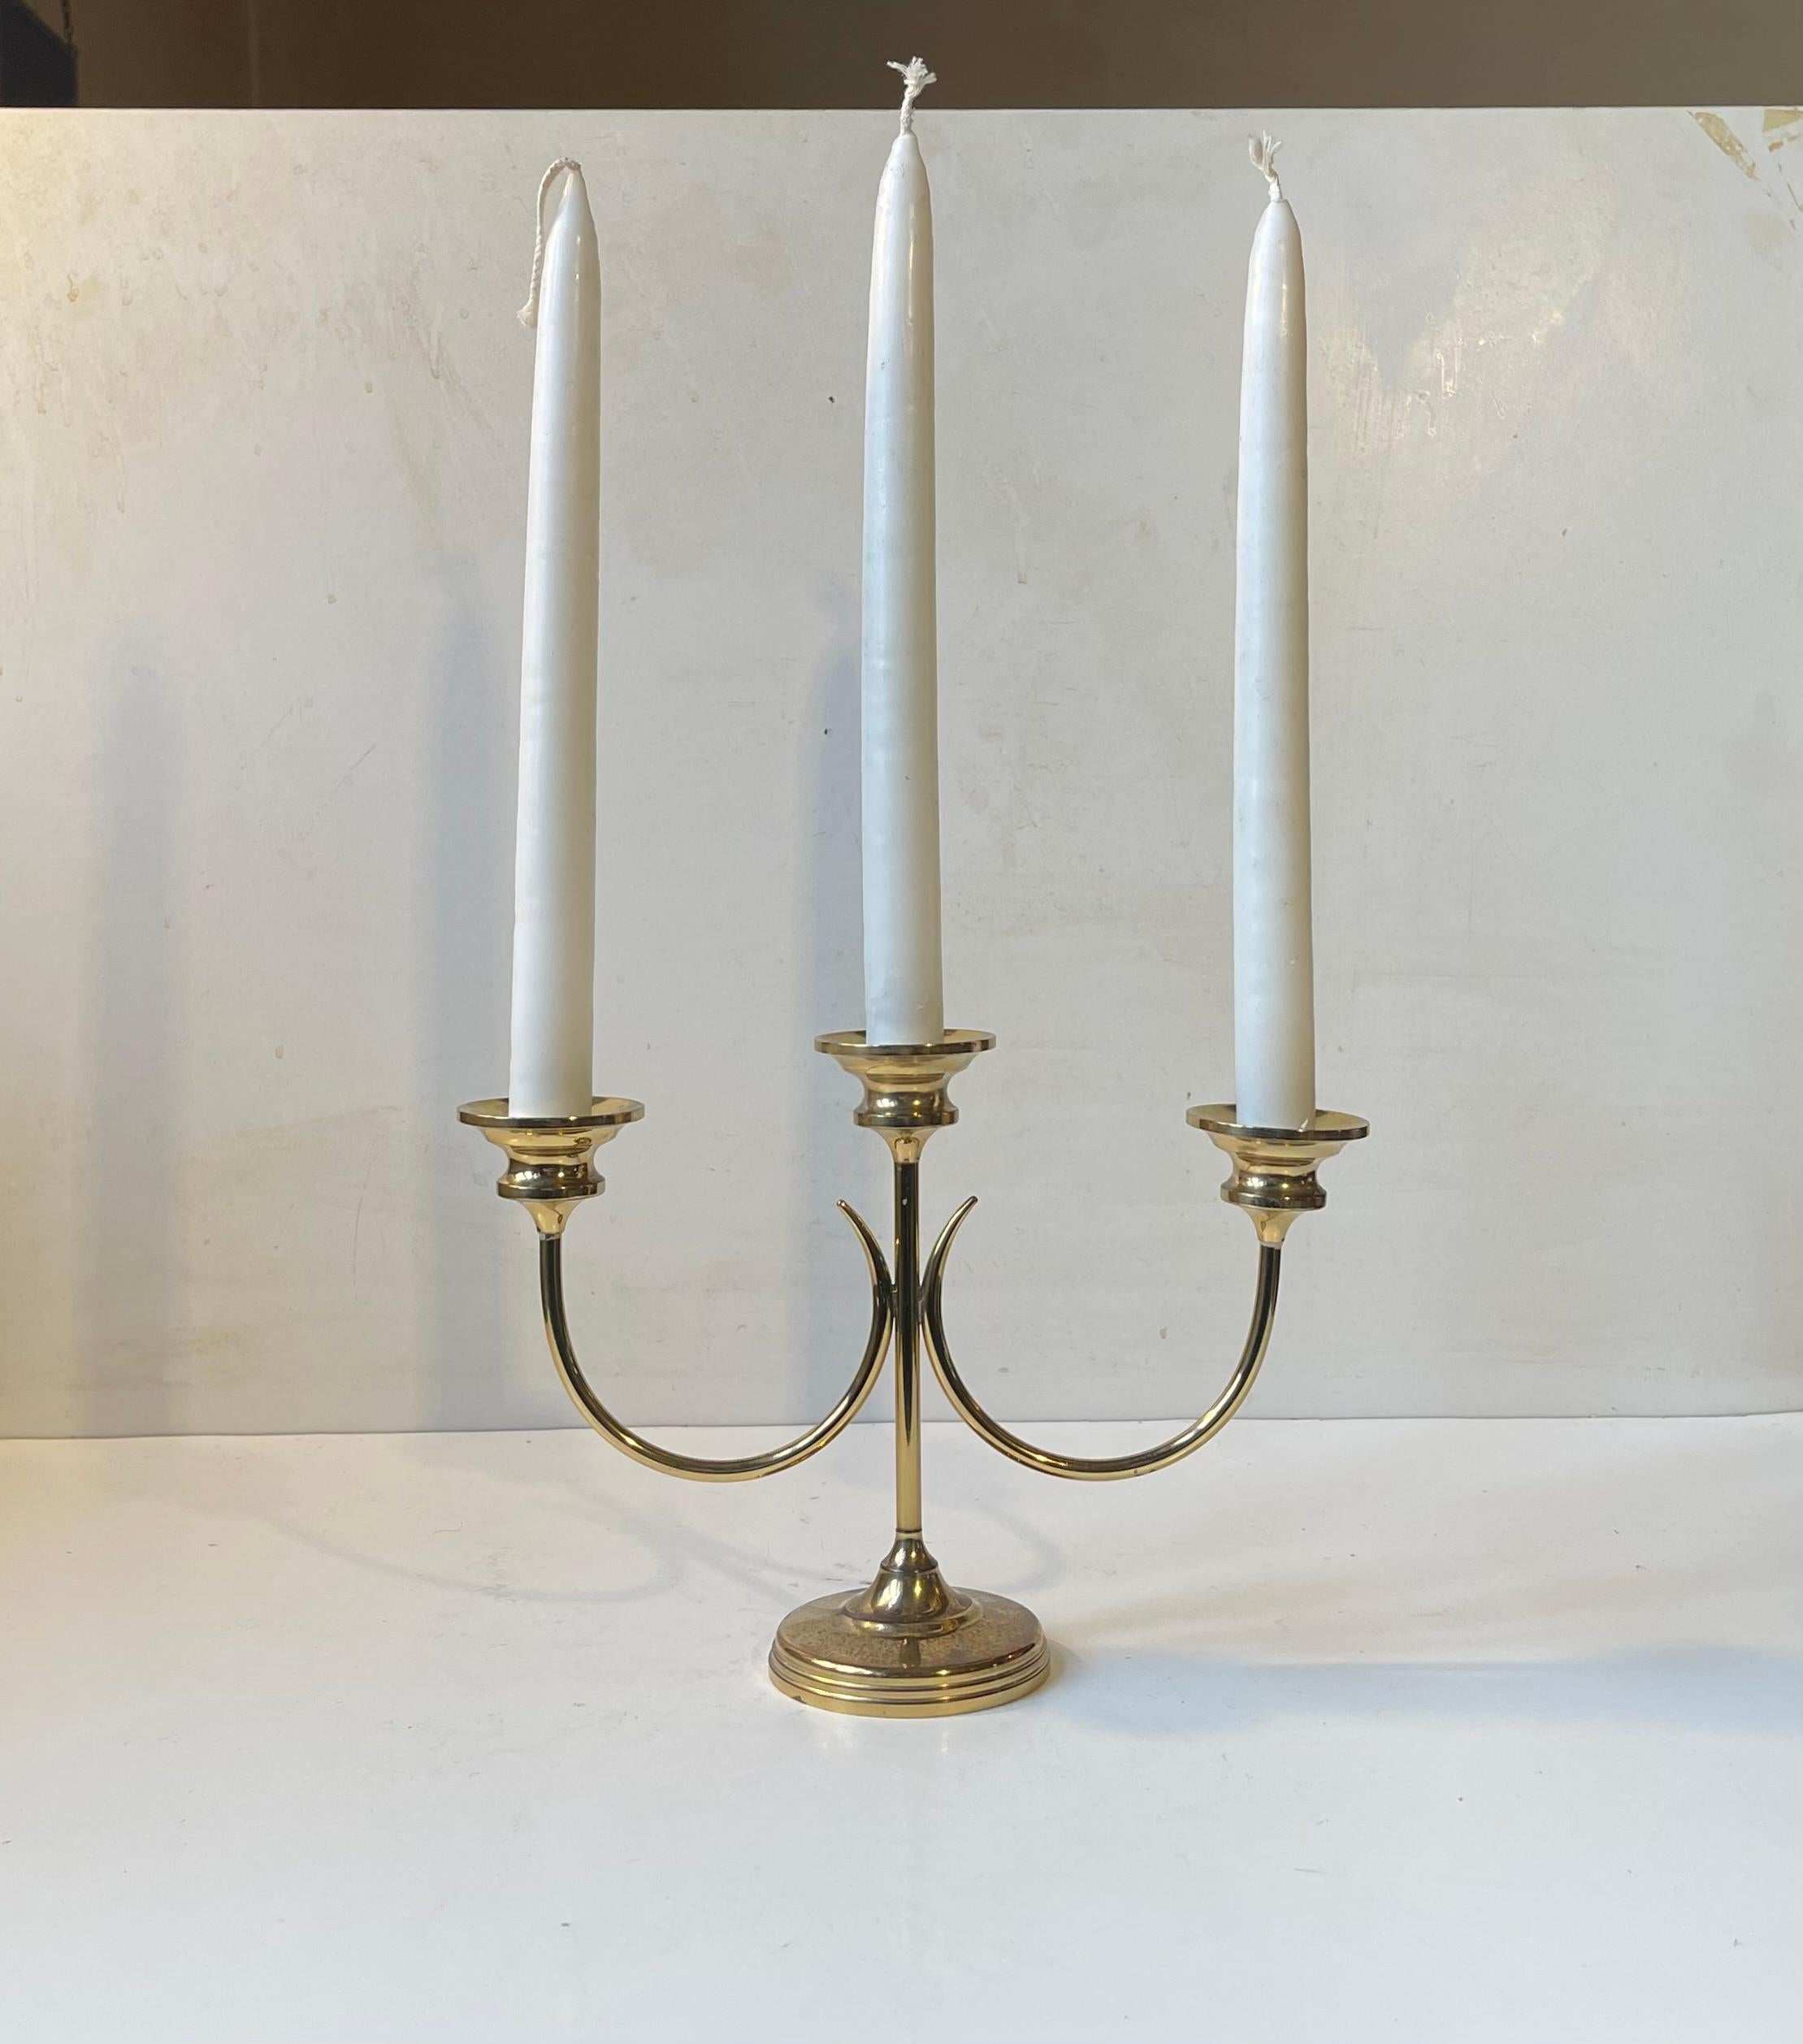 Gunnar Ander Swedish Modern Candleholder in Brass, 1960s In Good Condition For Sale In Esbjerg, DK